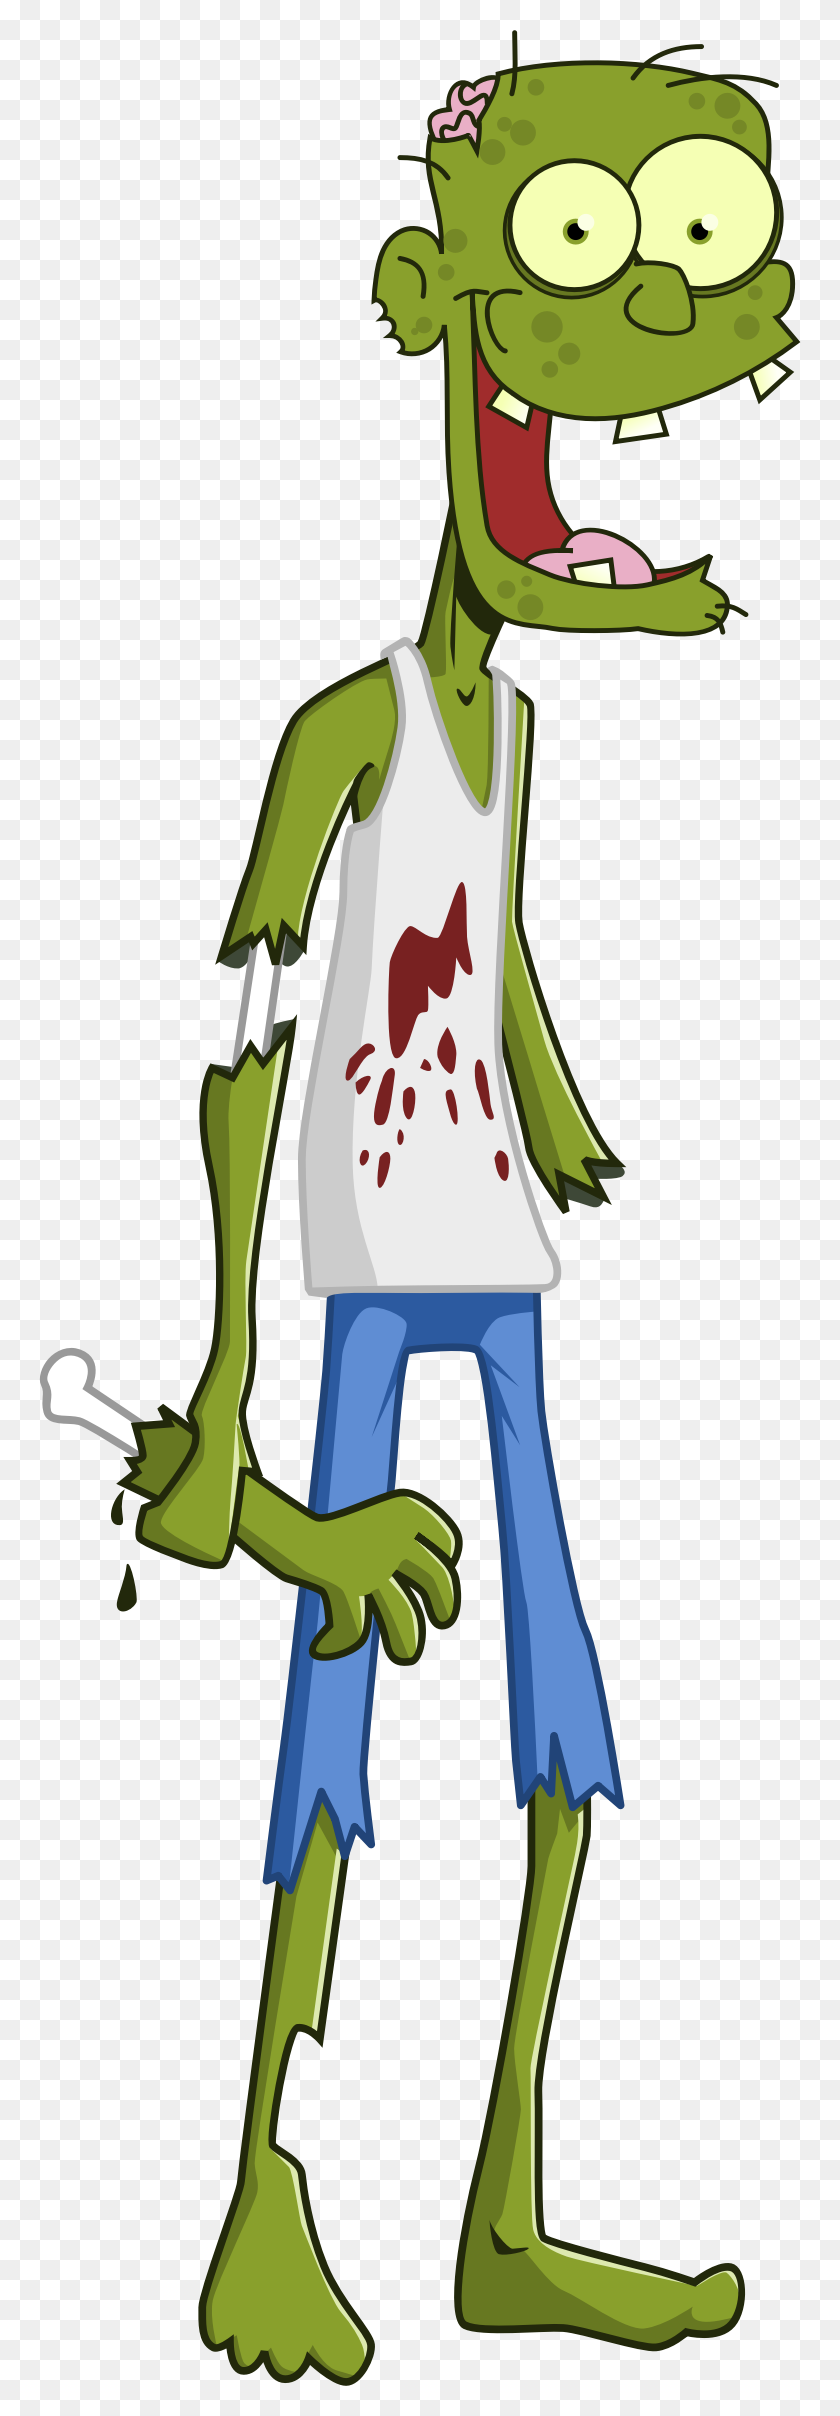 762x2356 Running Zombie Clip Art Illustration With Simple Gradients All - Running Turkey Clipart